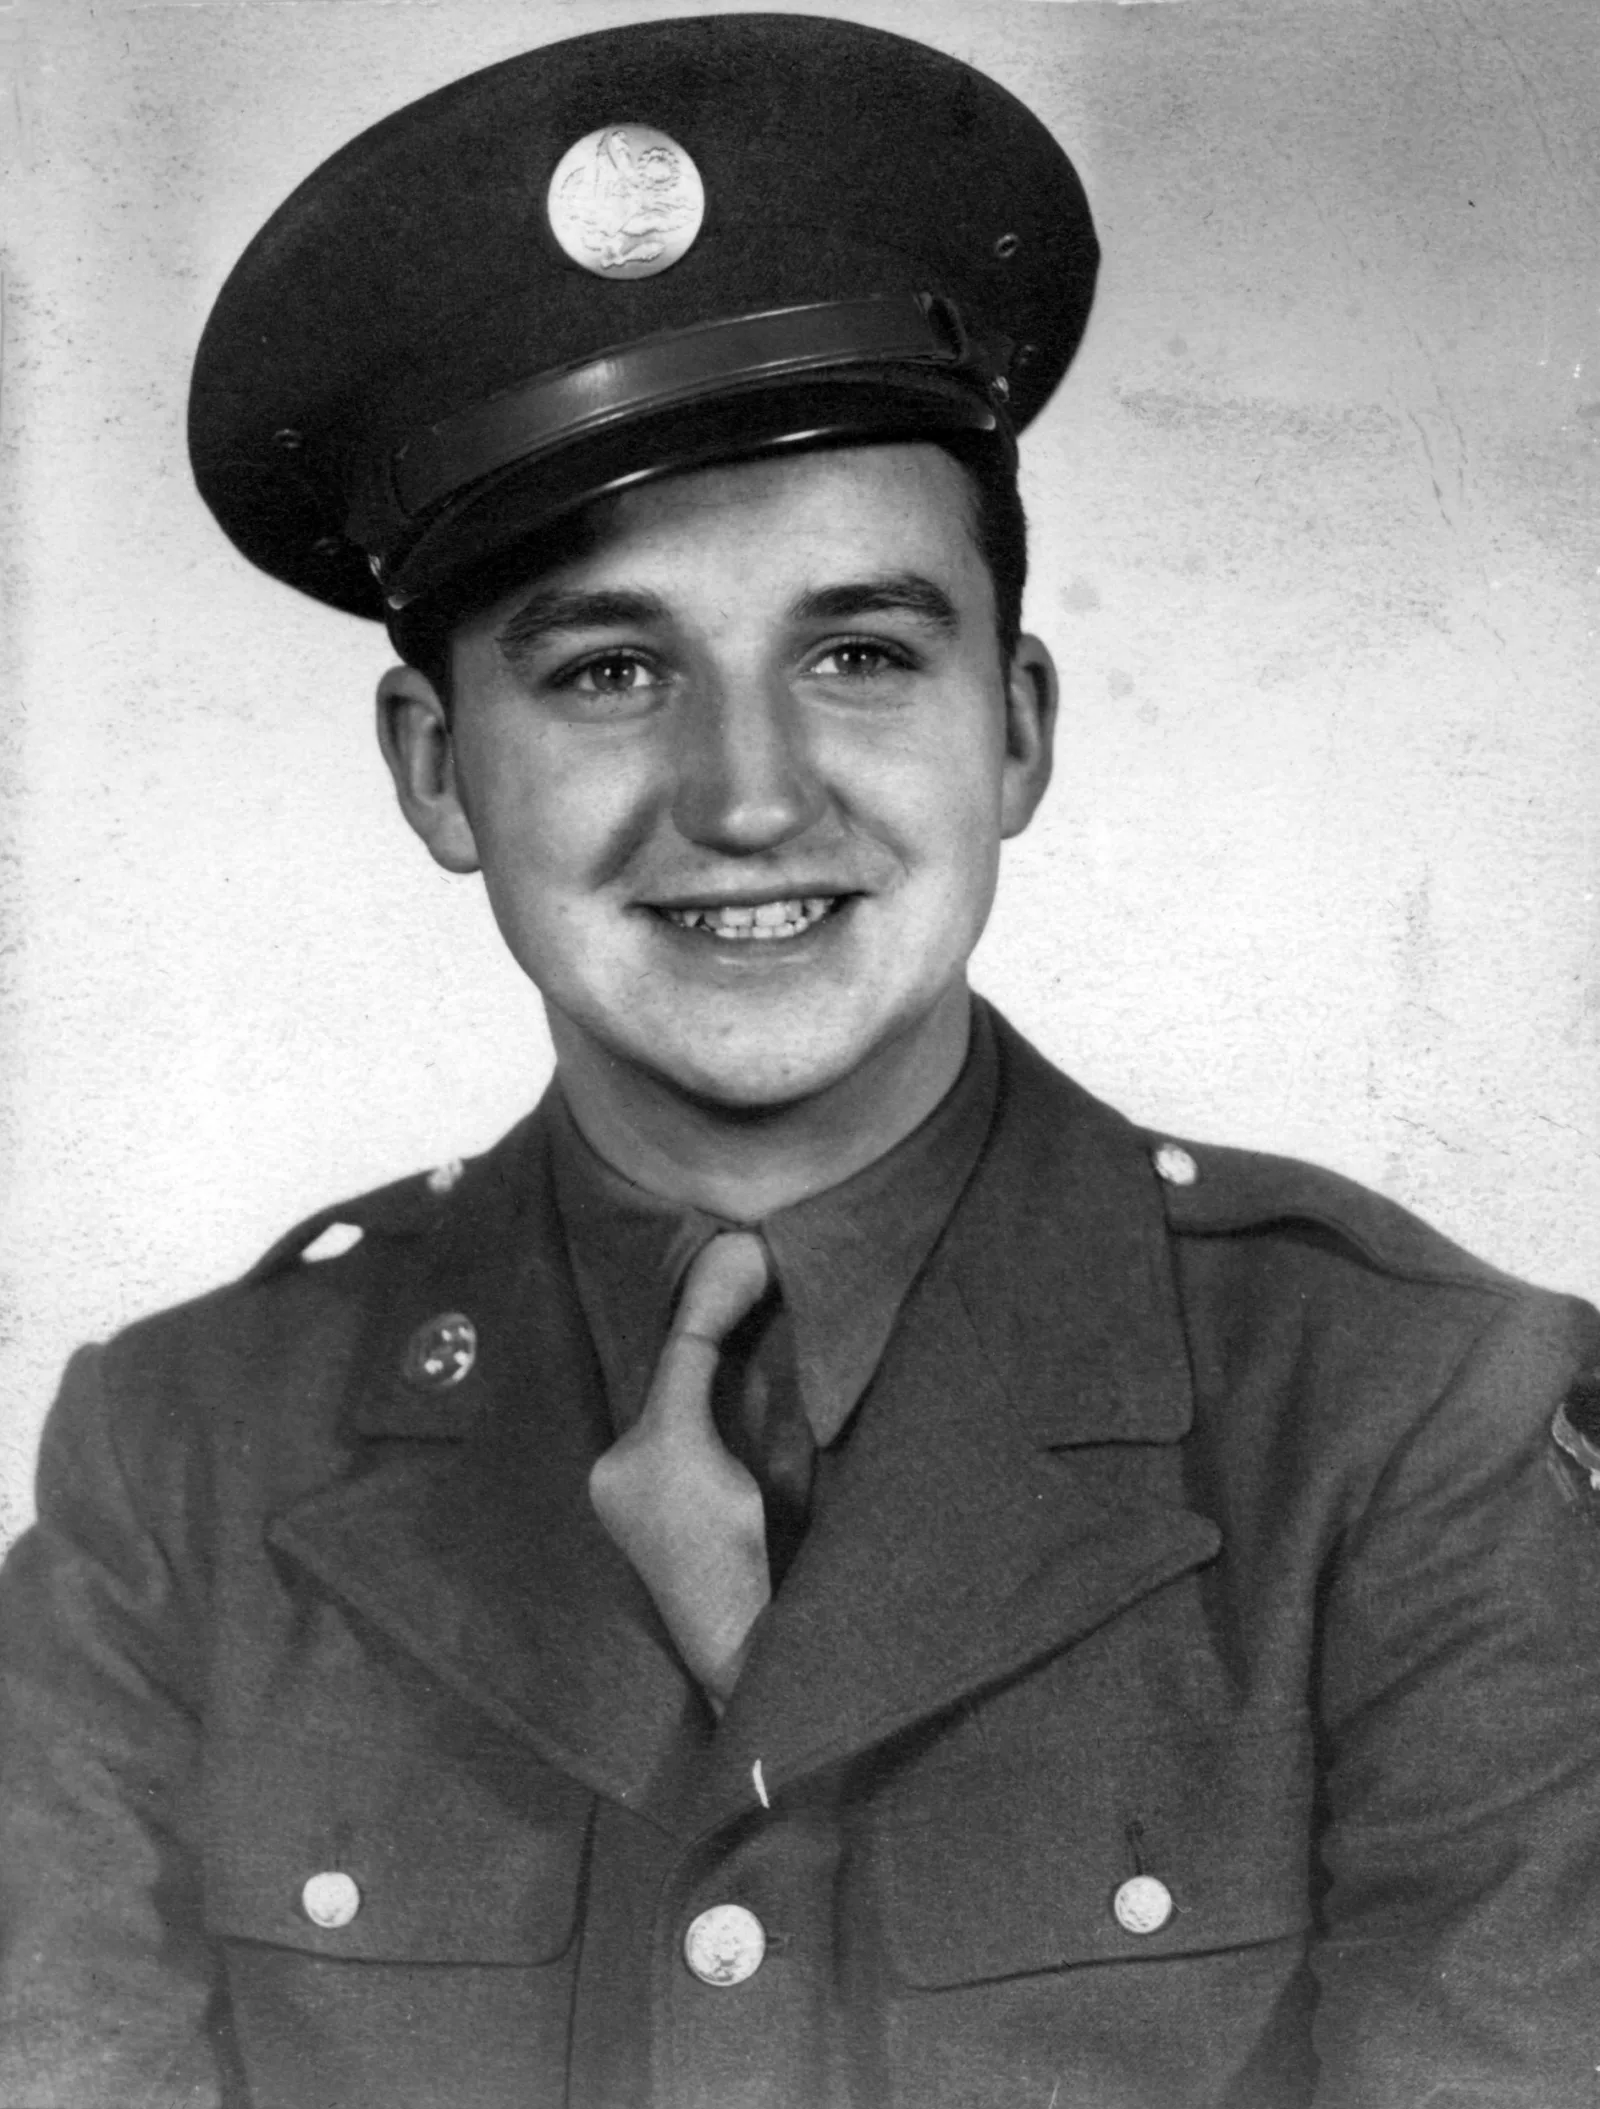 A young man smiles in military uniform while serving overseas during World War II